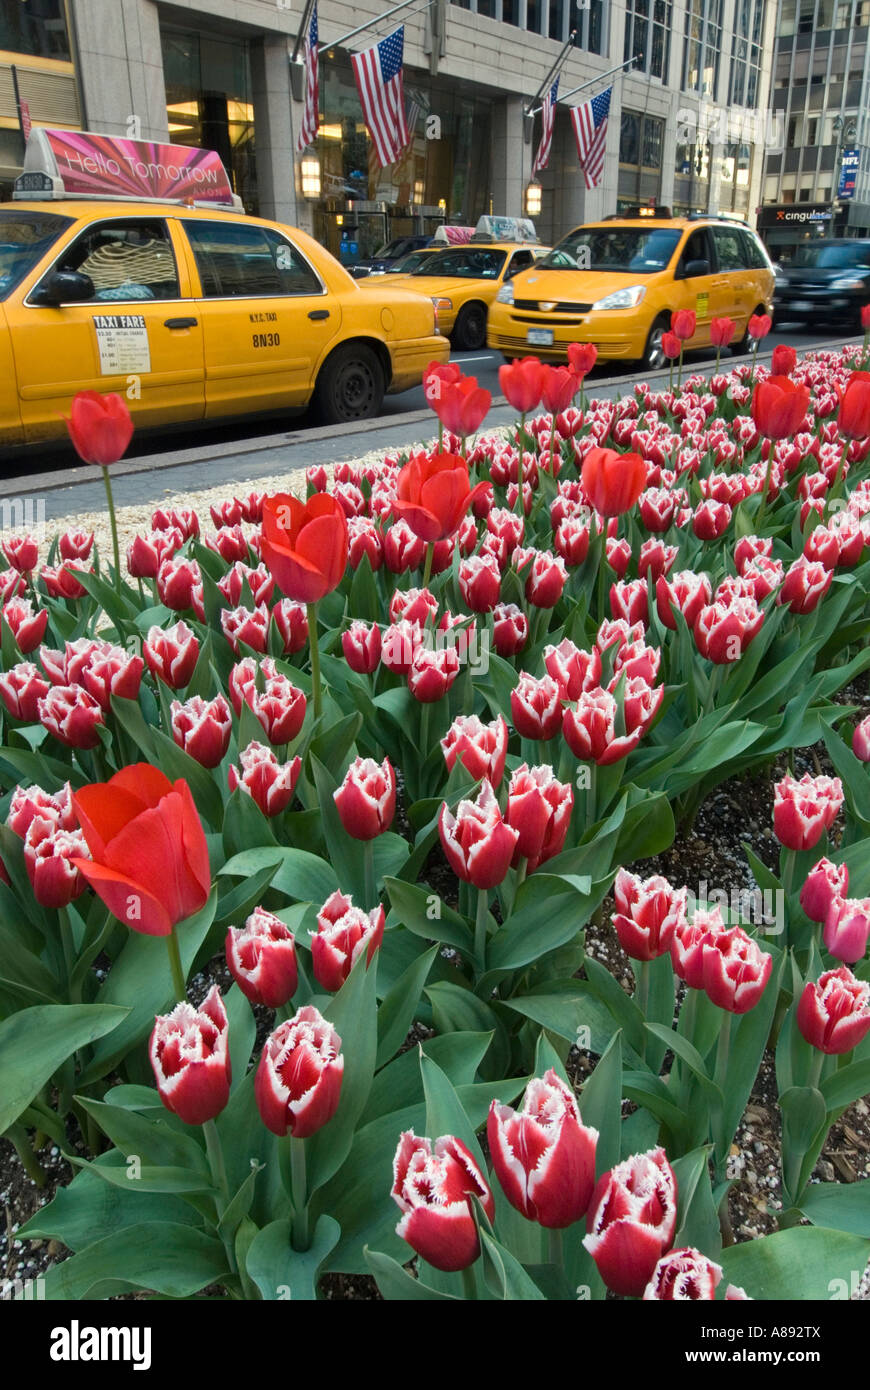 Tulips and Taxis on Park Avenue Stock Photo